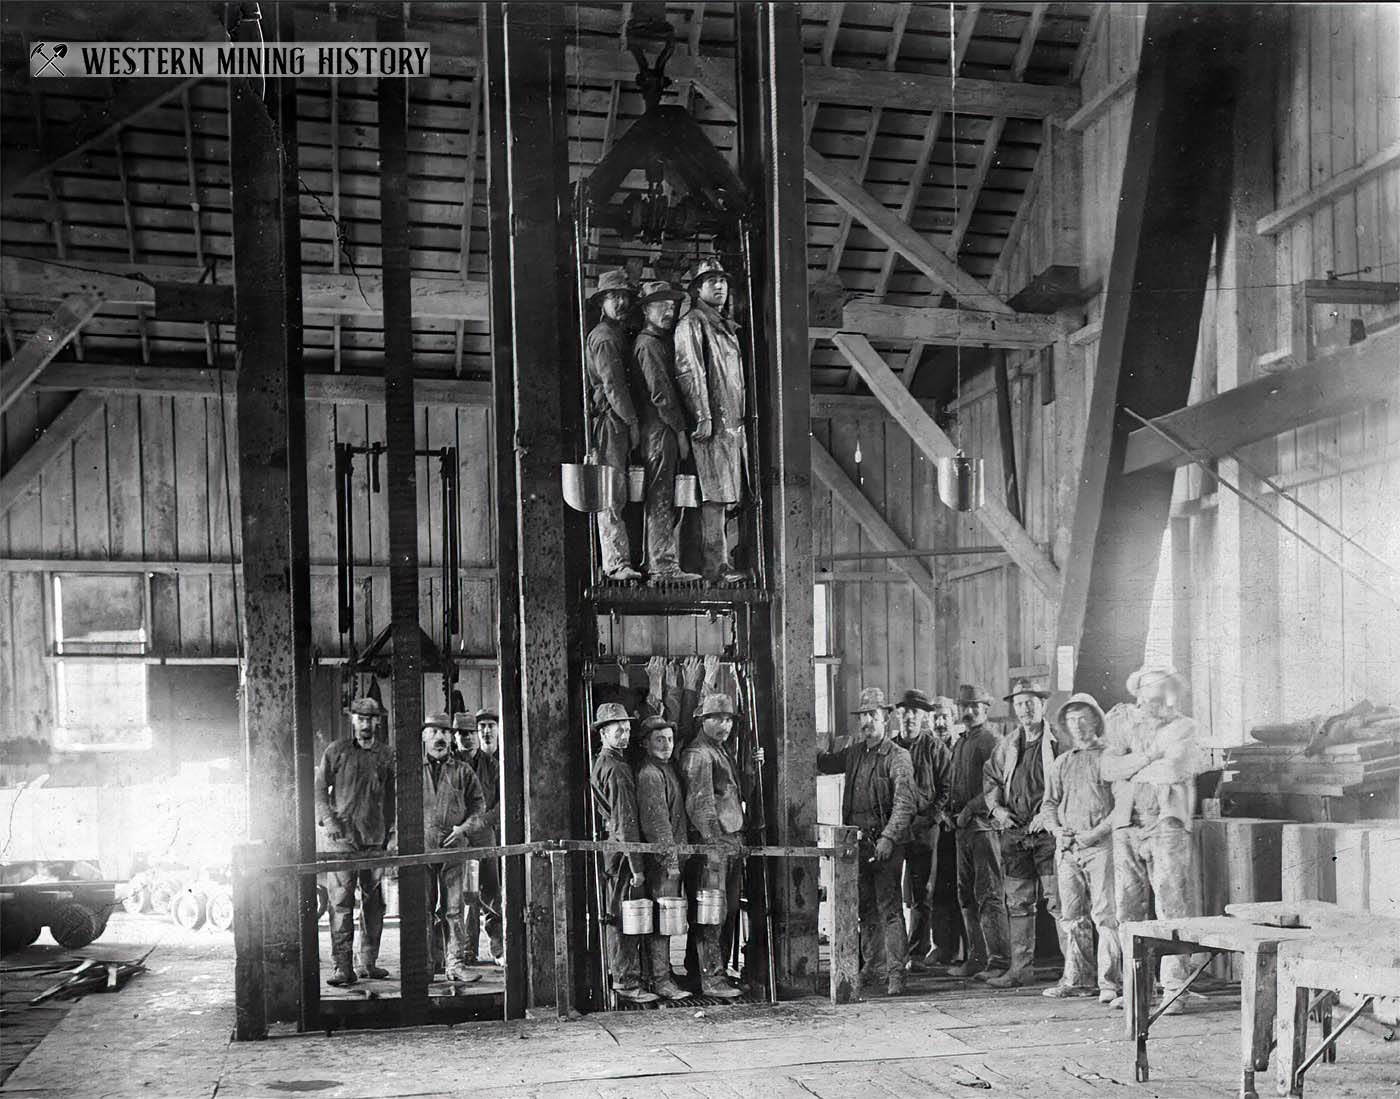 Miners in a Butte, Montana shaft house 